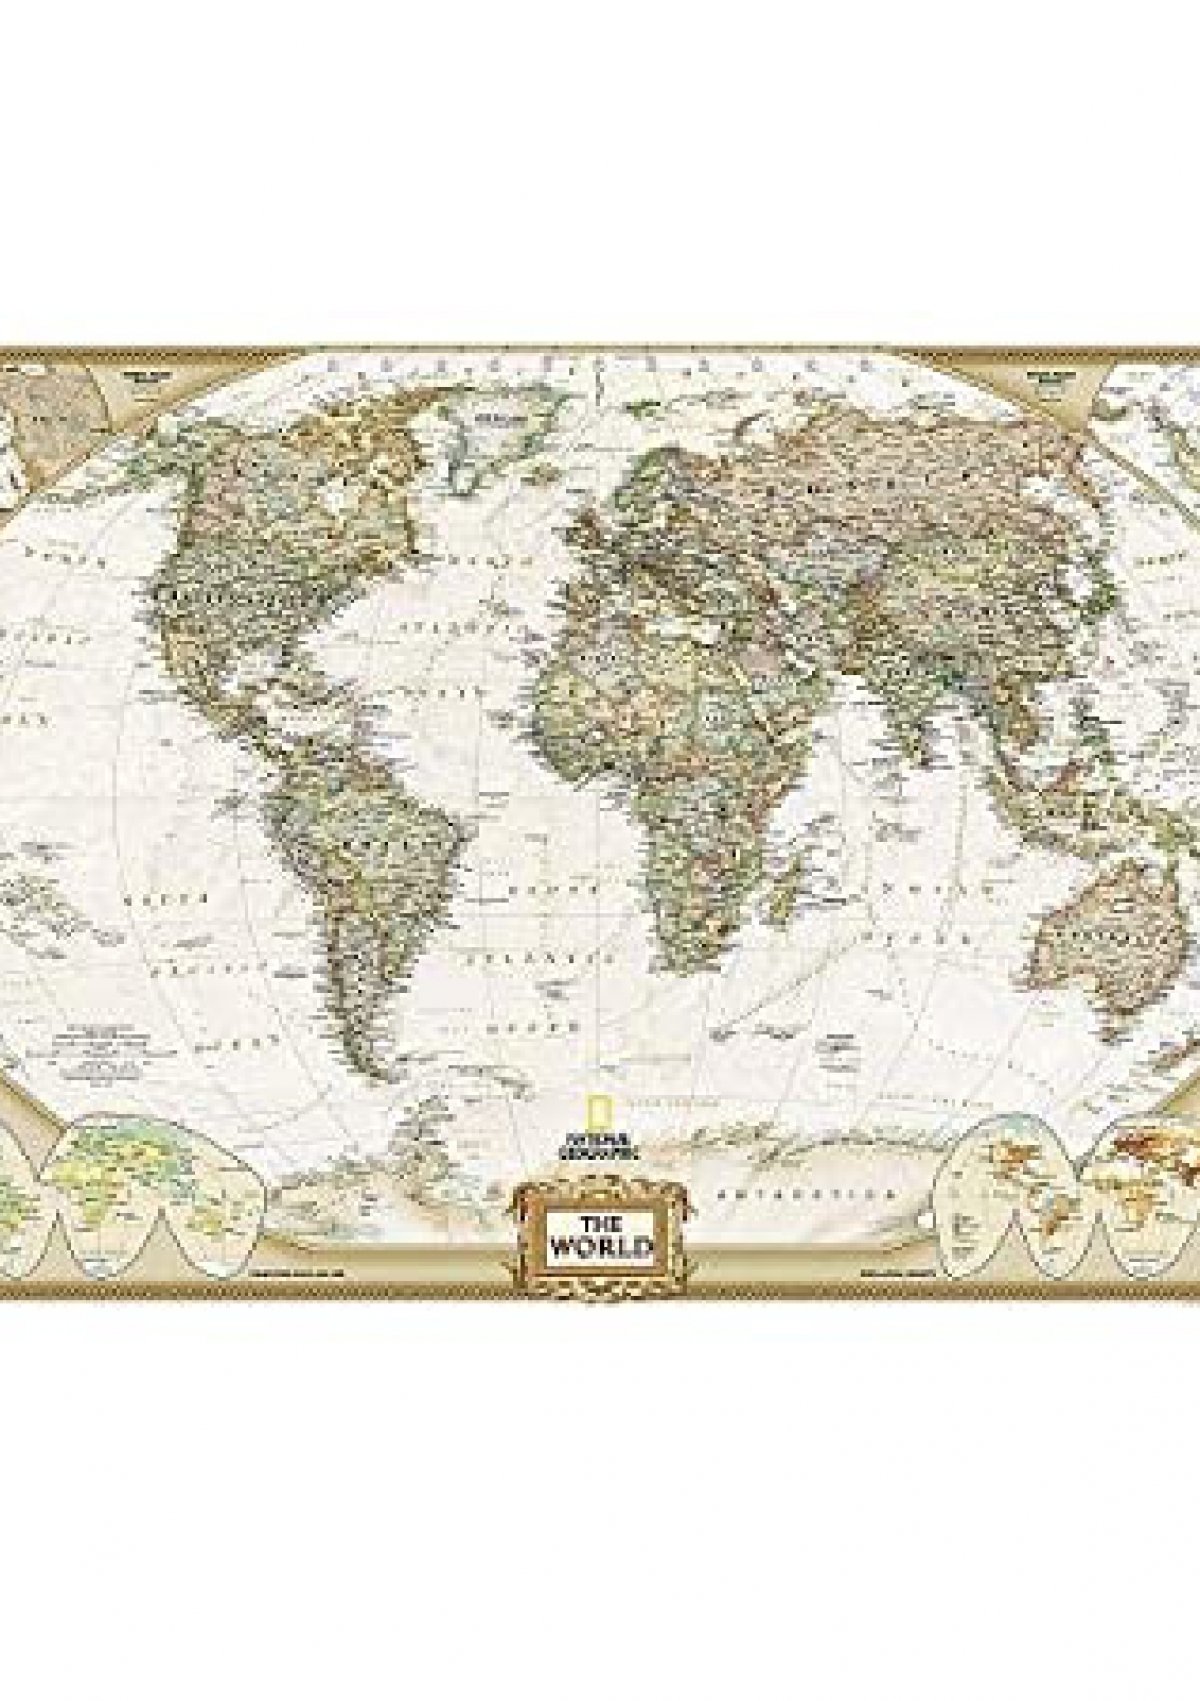 ebook-national-geographic-world-executive-enlarged-wall-map-73-x-48